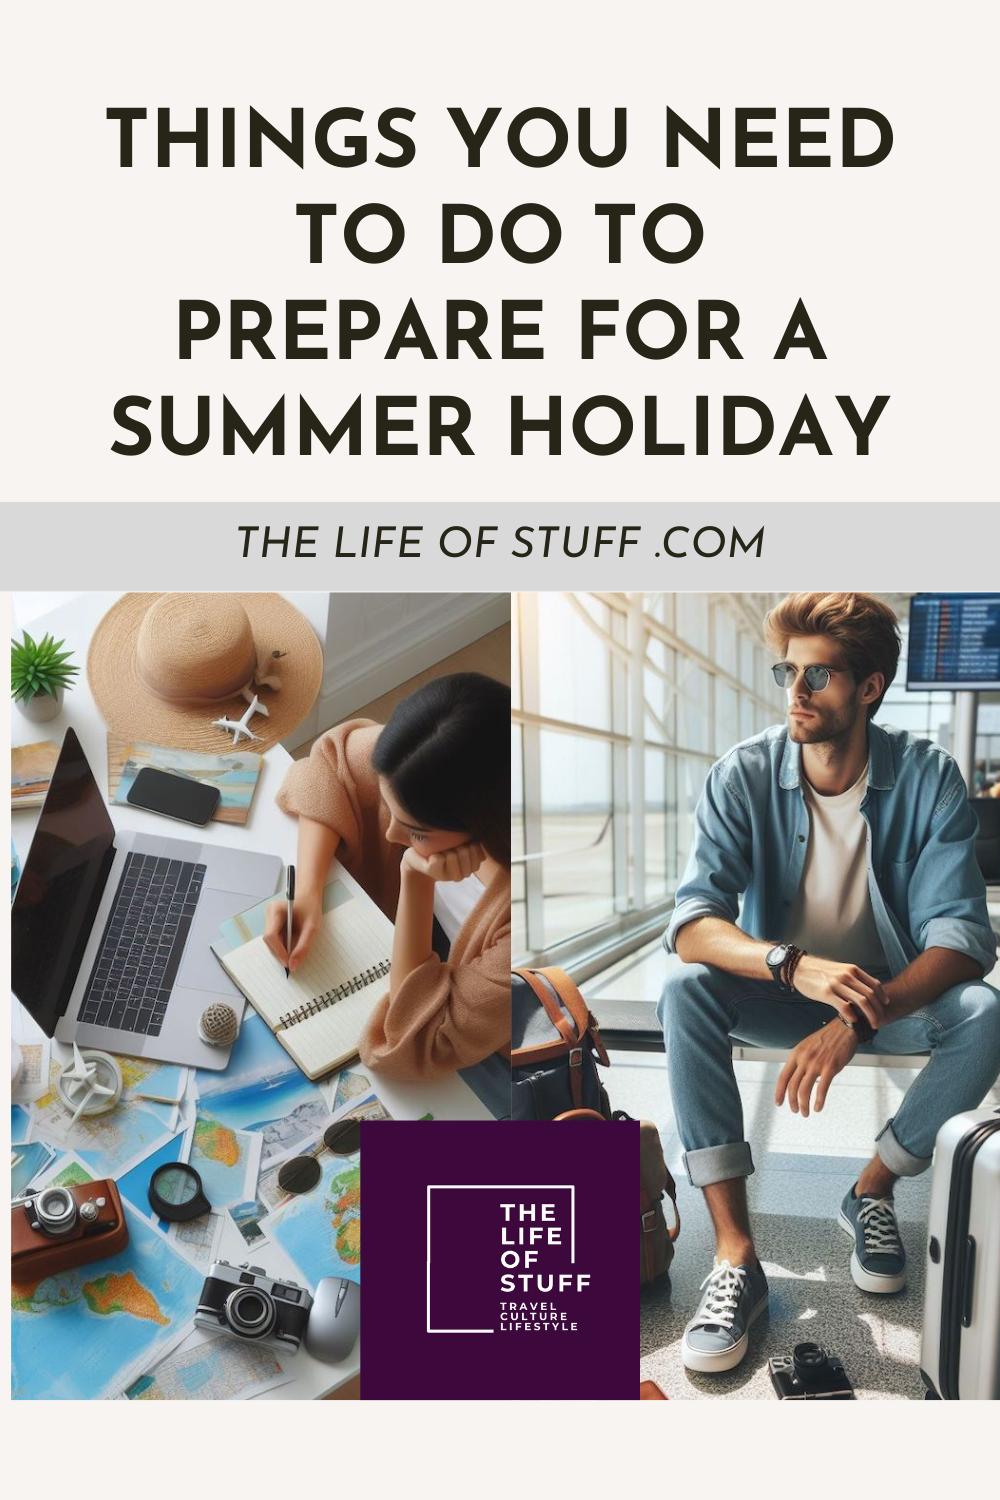 Things You Need to do to Prepare for a Summer Holiday - The Life of Stuff